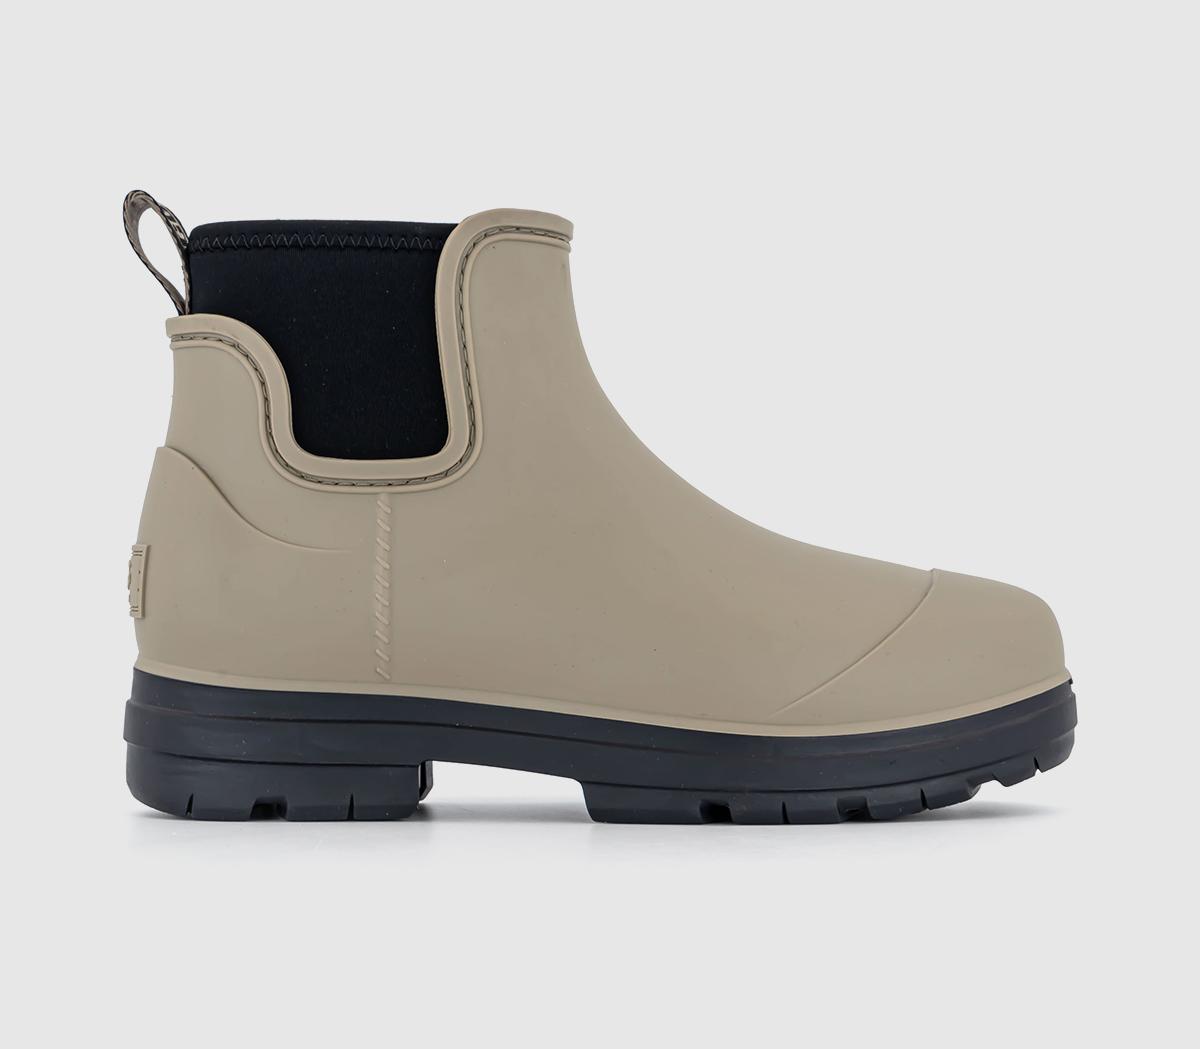 Droplet Rain Boots Taupe